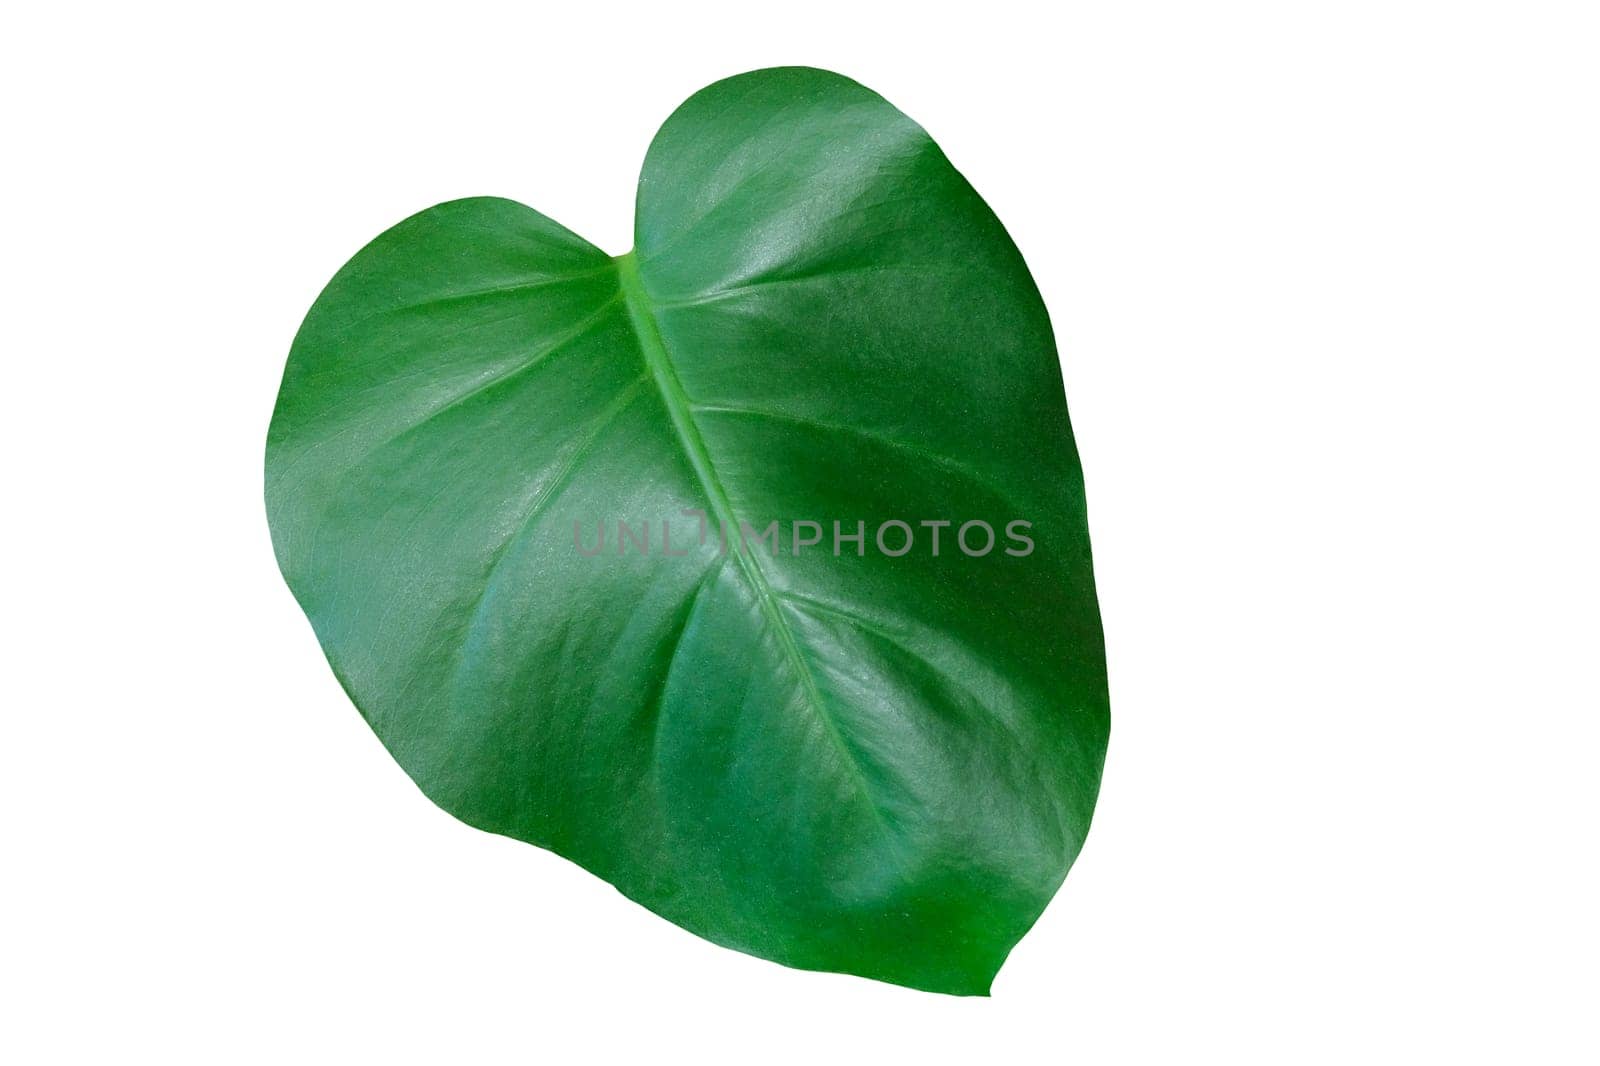 Green tropical leaves isolated on a white background by Shablovskyistock